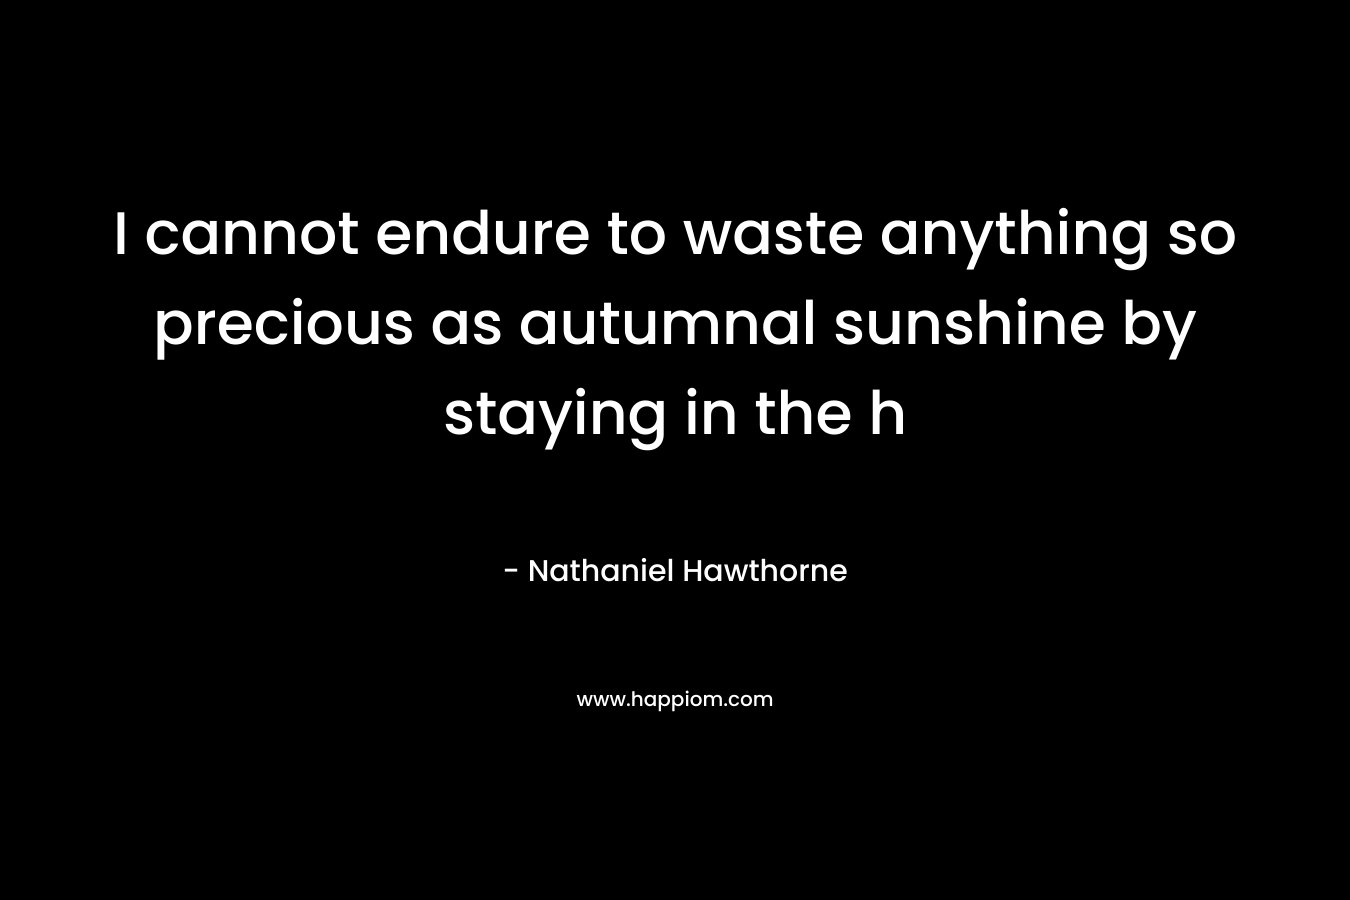 I cannot endure to waste anything so precious as autumnal sunshine by staying in the h